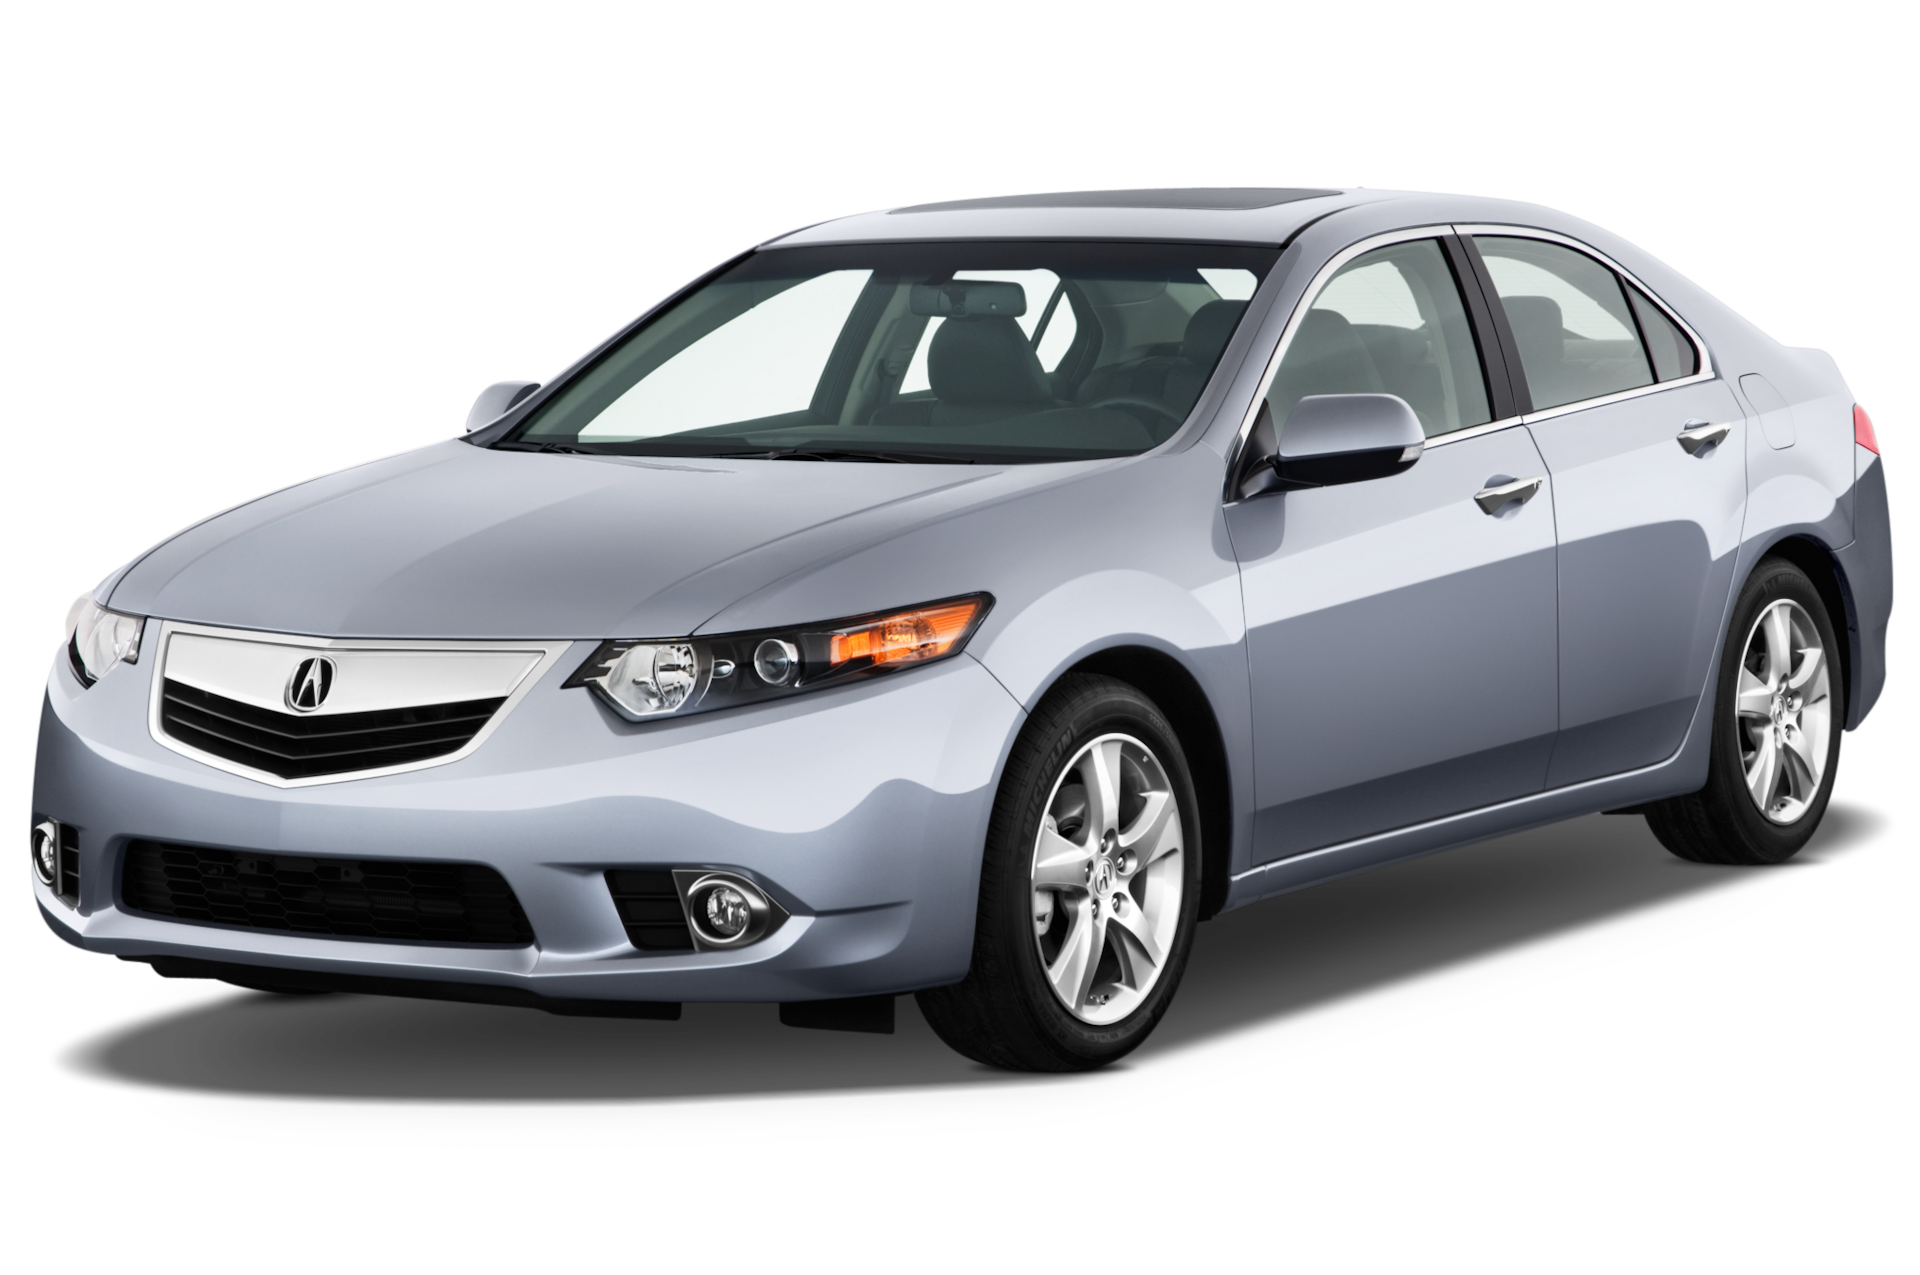 2013 Acura TSX Prices, Reviews, and Photos - MotorTrend